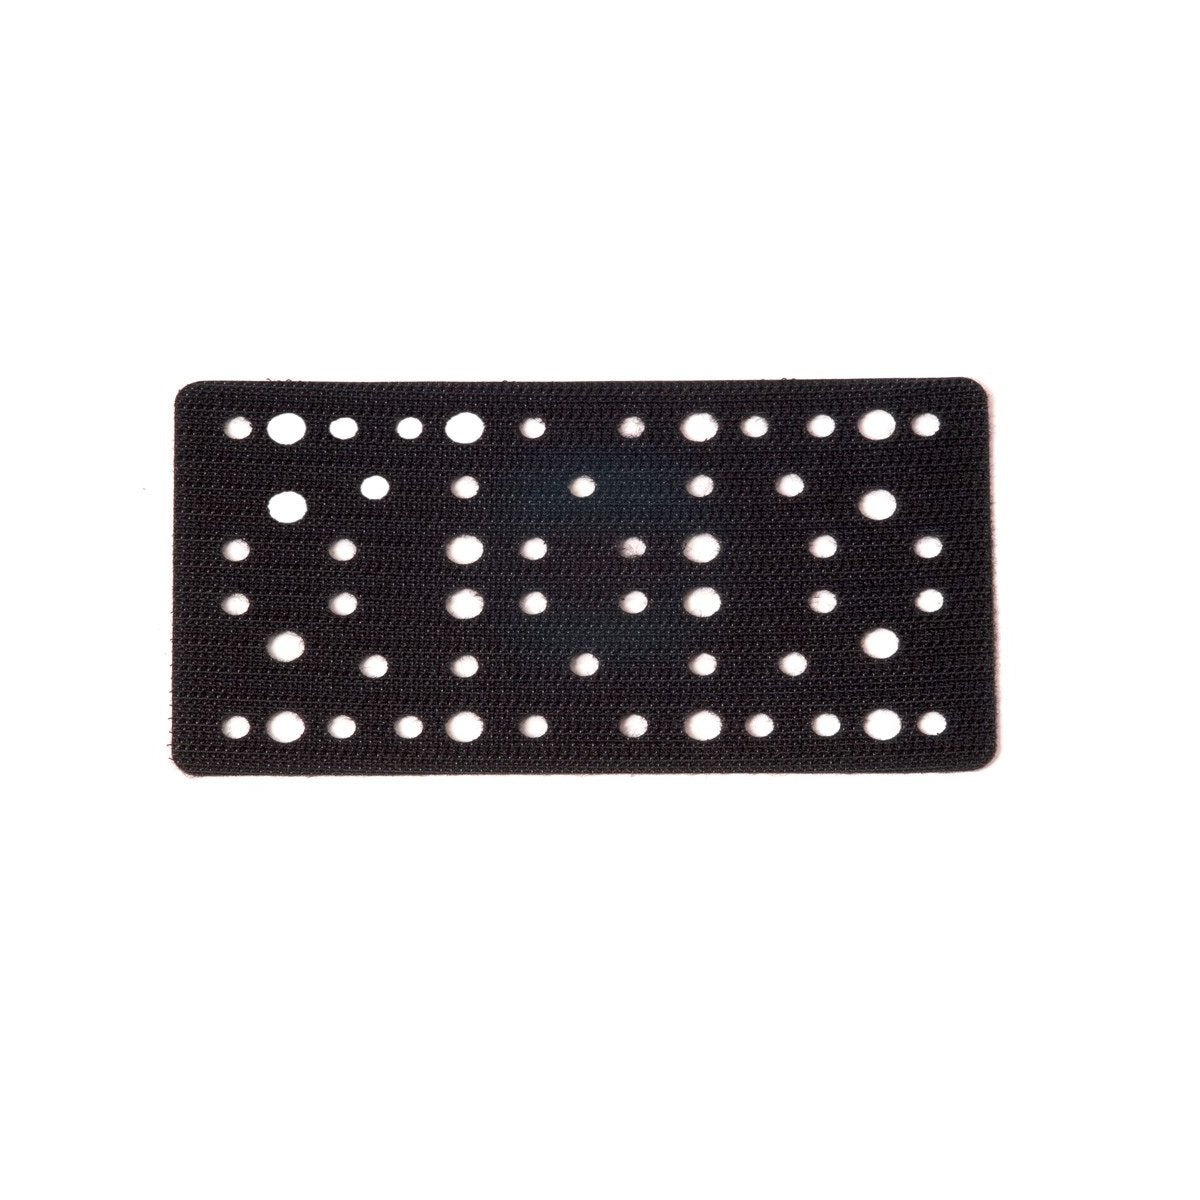 A Pad Saver with hooks on the facing side, and a 54-hole pattern for dust extraction through the pad.